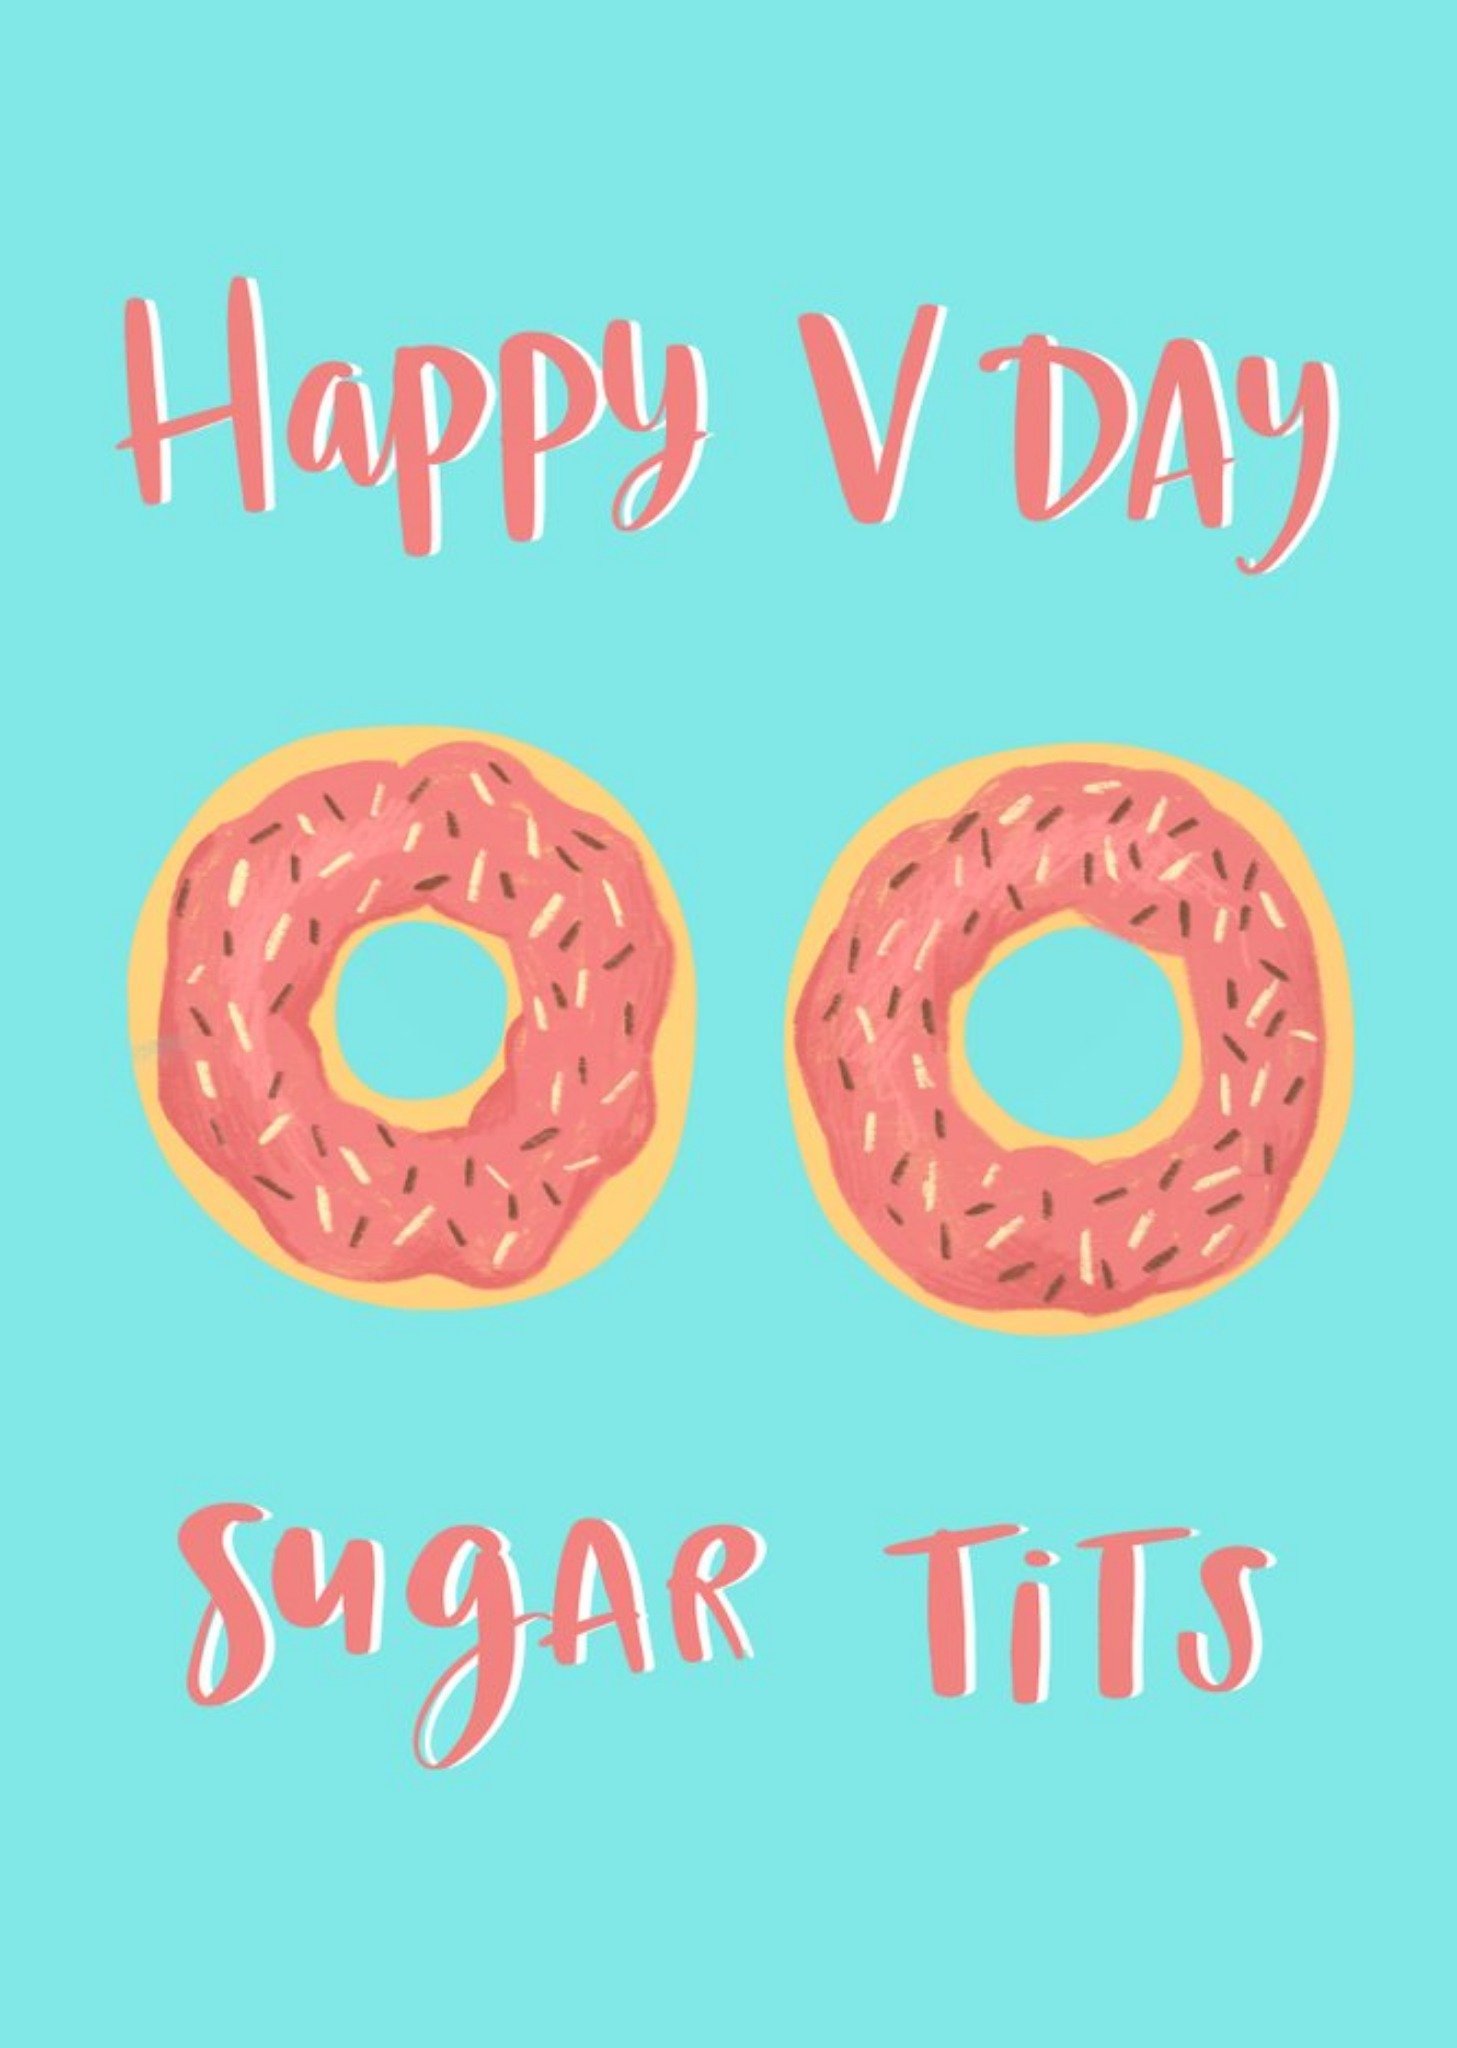 Moonpig Donuts Rude Cheeky Love Tits Happy V Day Valentines Day Card, Large